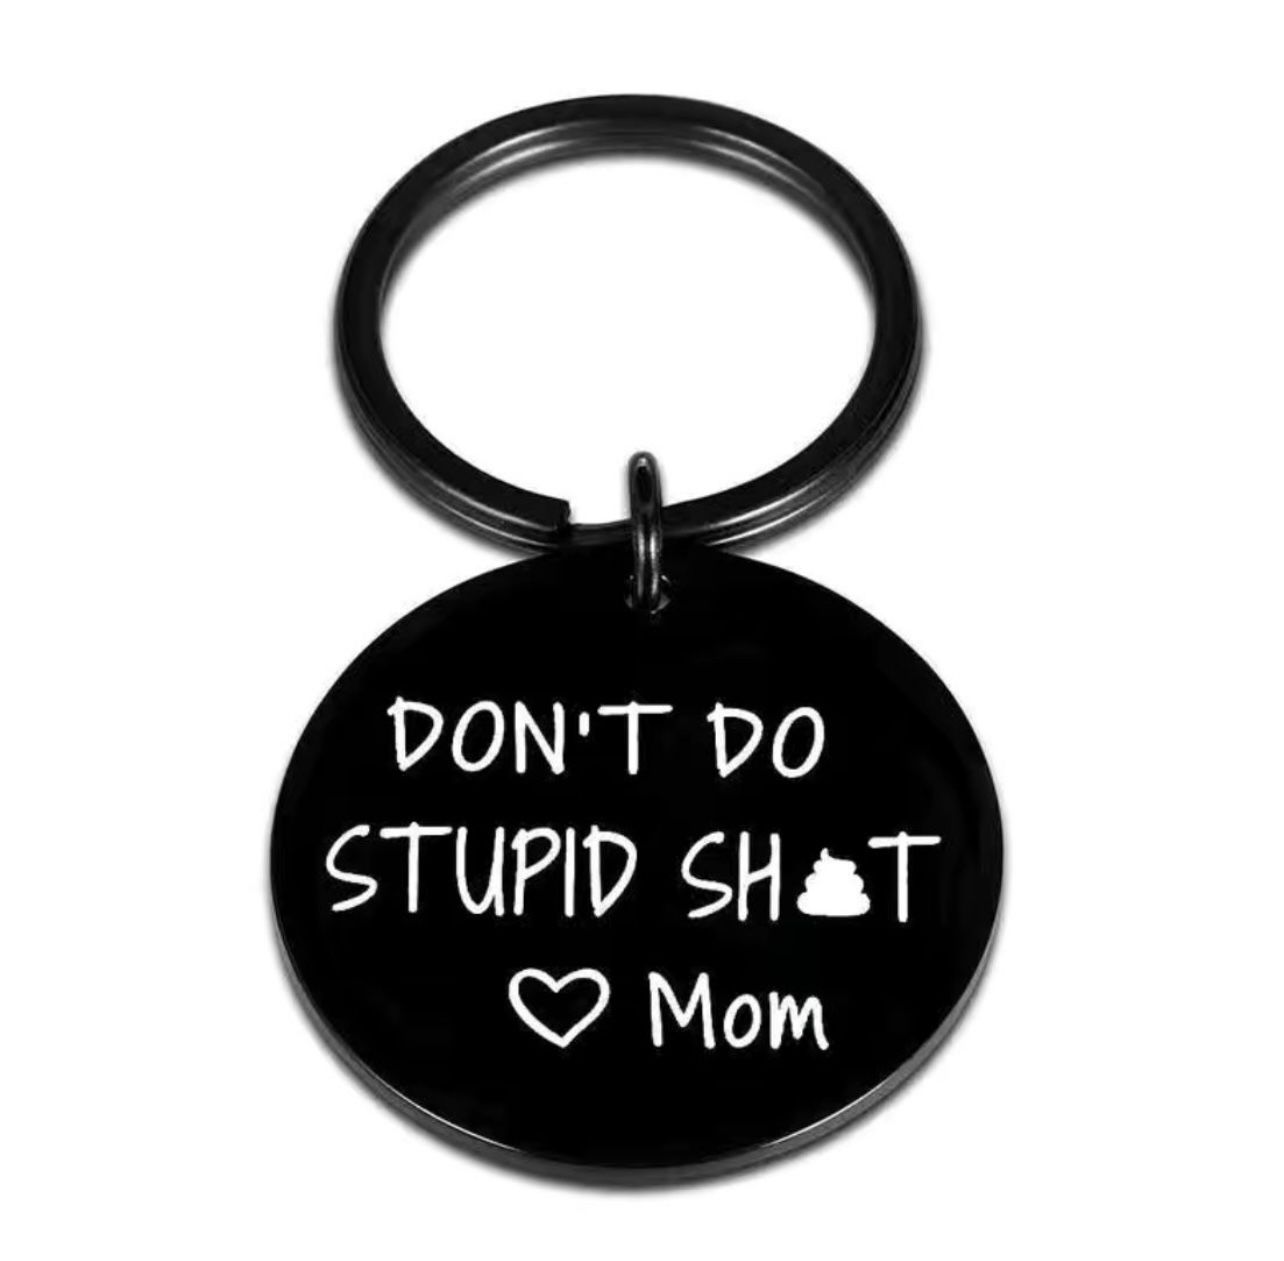 💩 Funny Don’t Do Stupid S#!t Black Metal Daughter Son Keychain